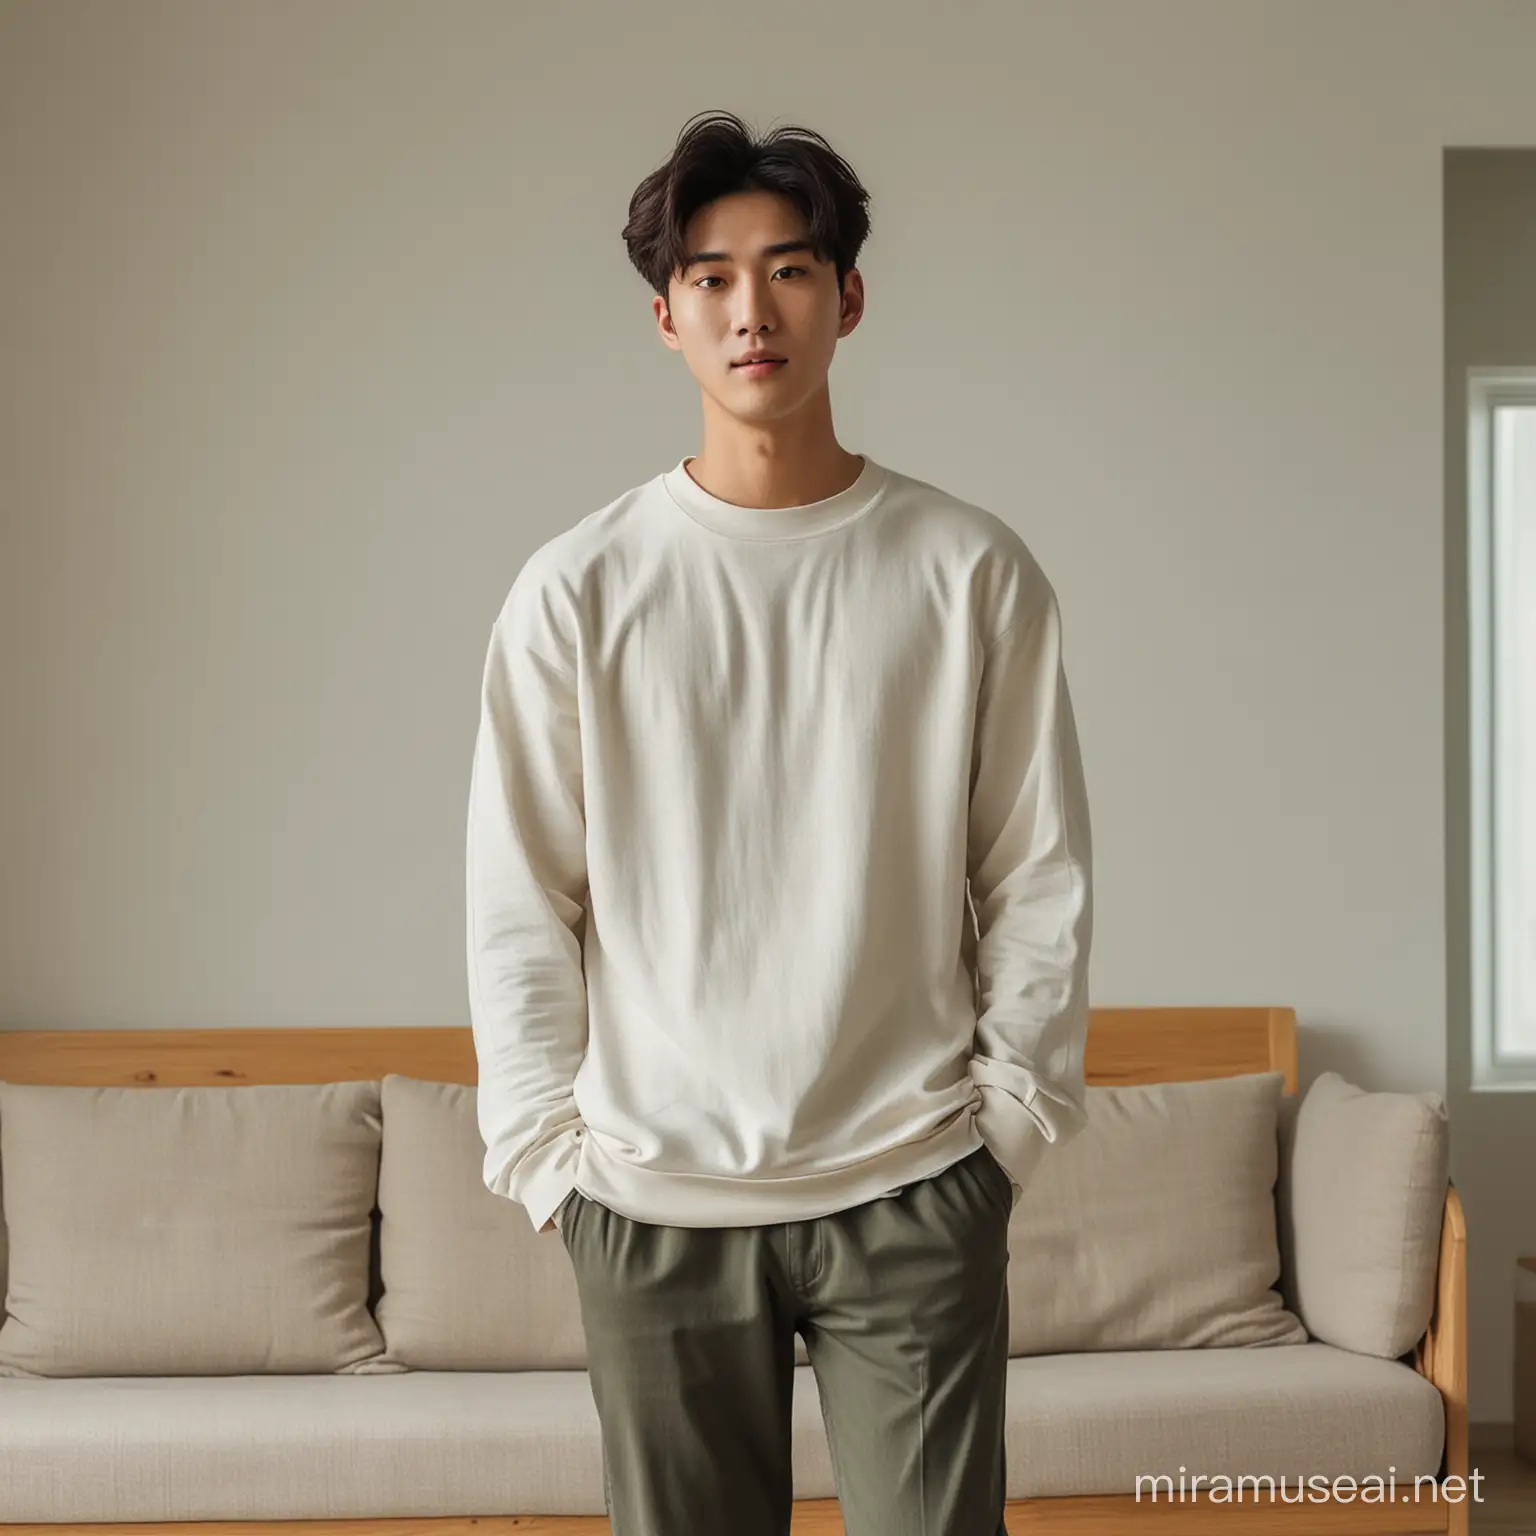 Young Korean Man Relaxing at Home in Casual Indoor Clothes